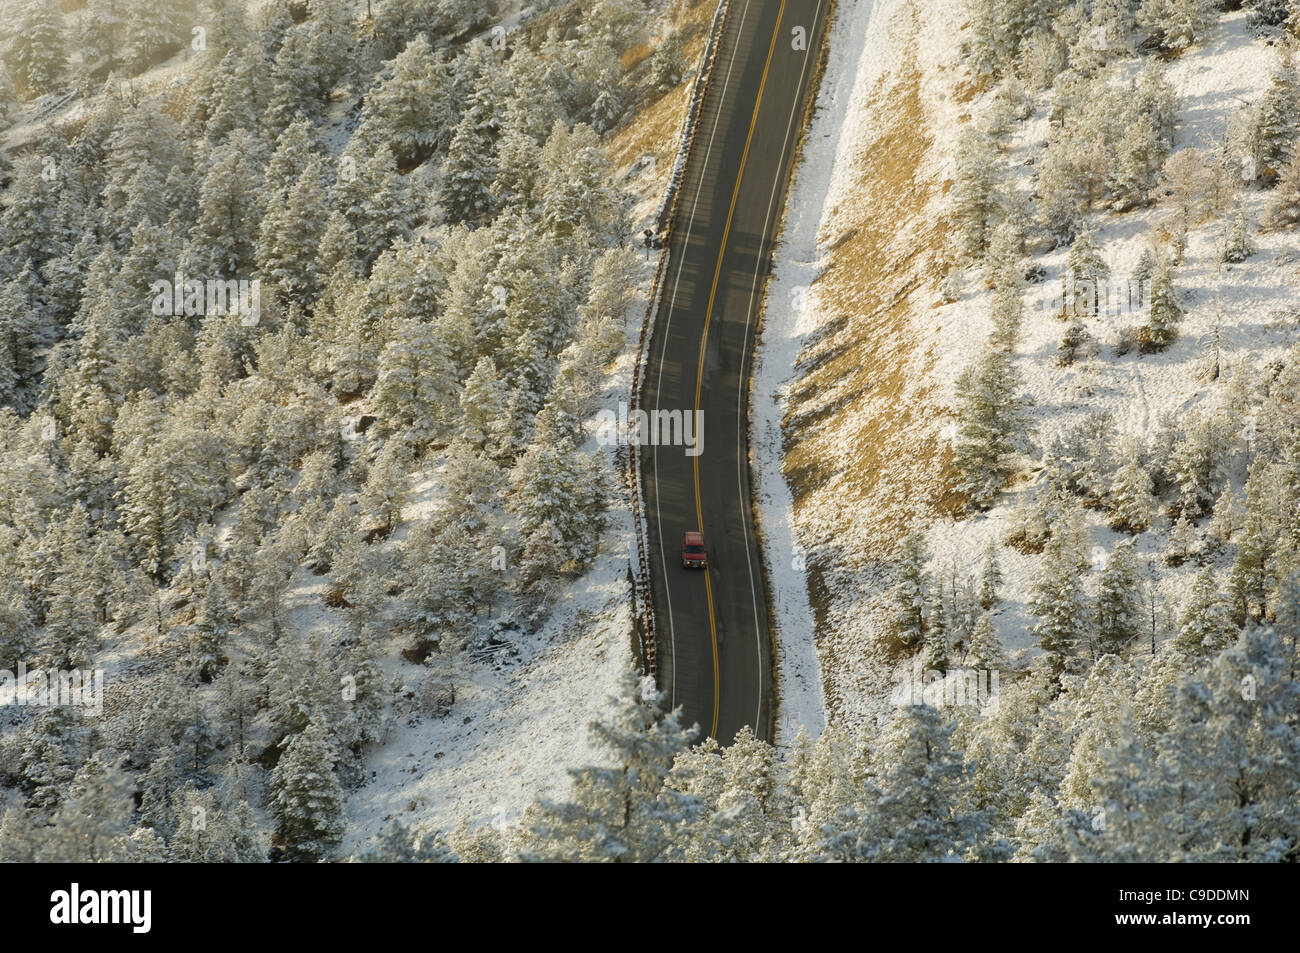 High angle view of a car on the road, Chief Joseph Scenic Byway, Wyoming, USA Stock Photo